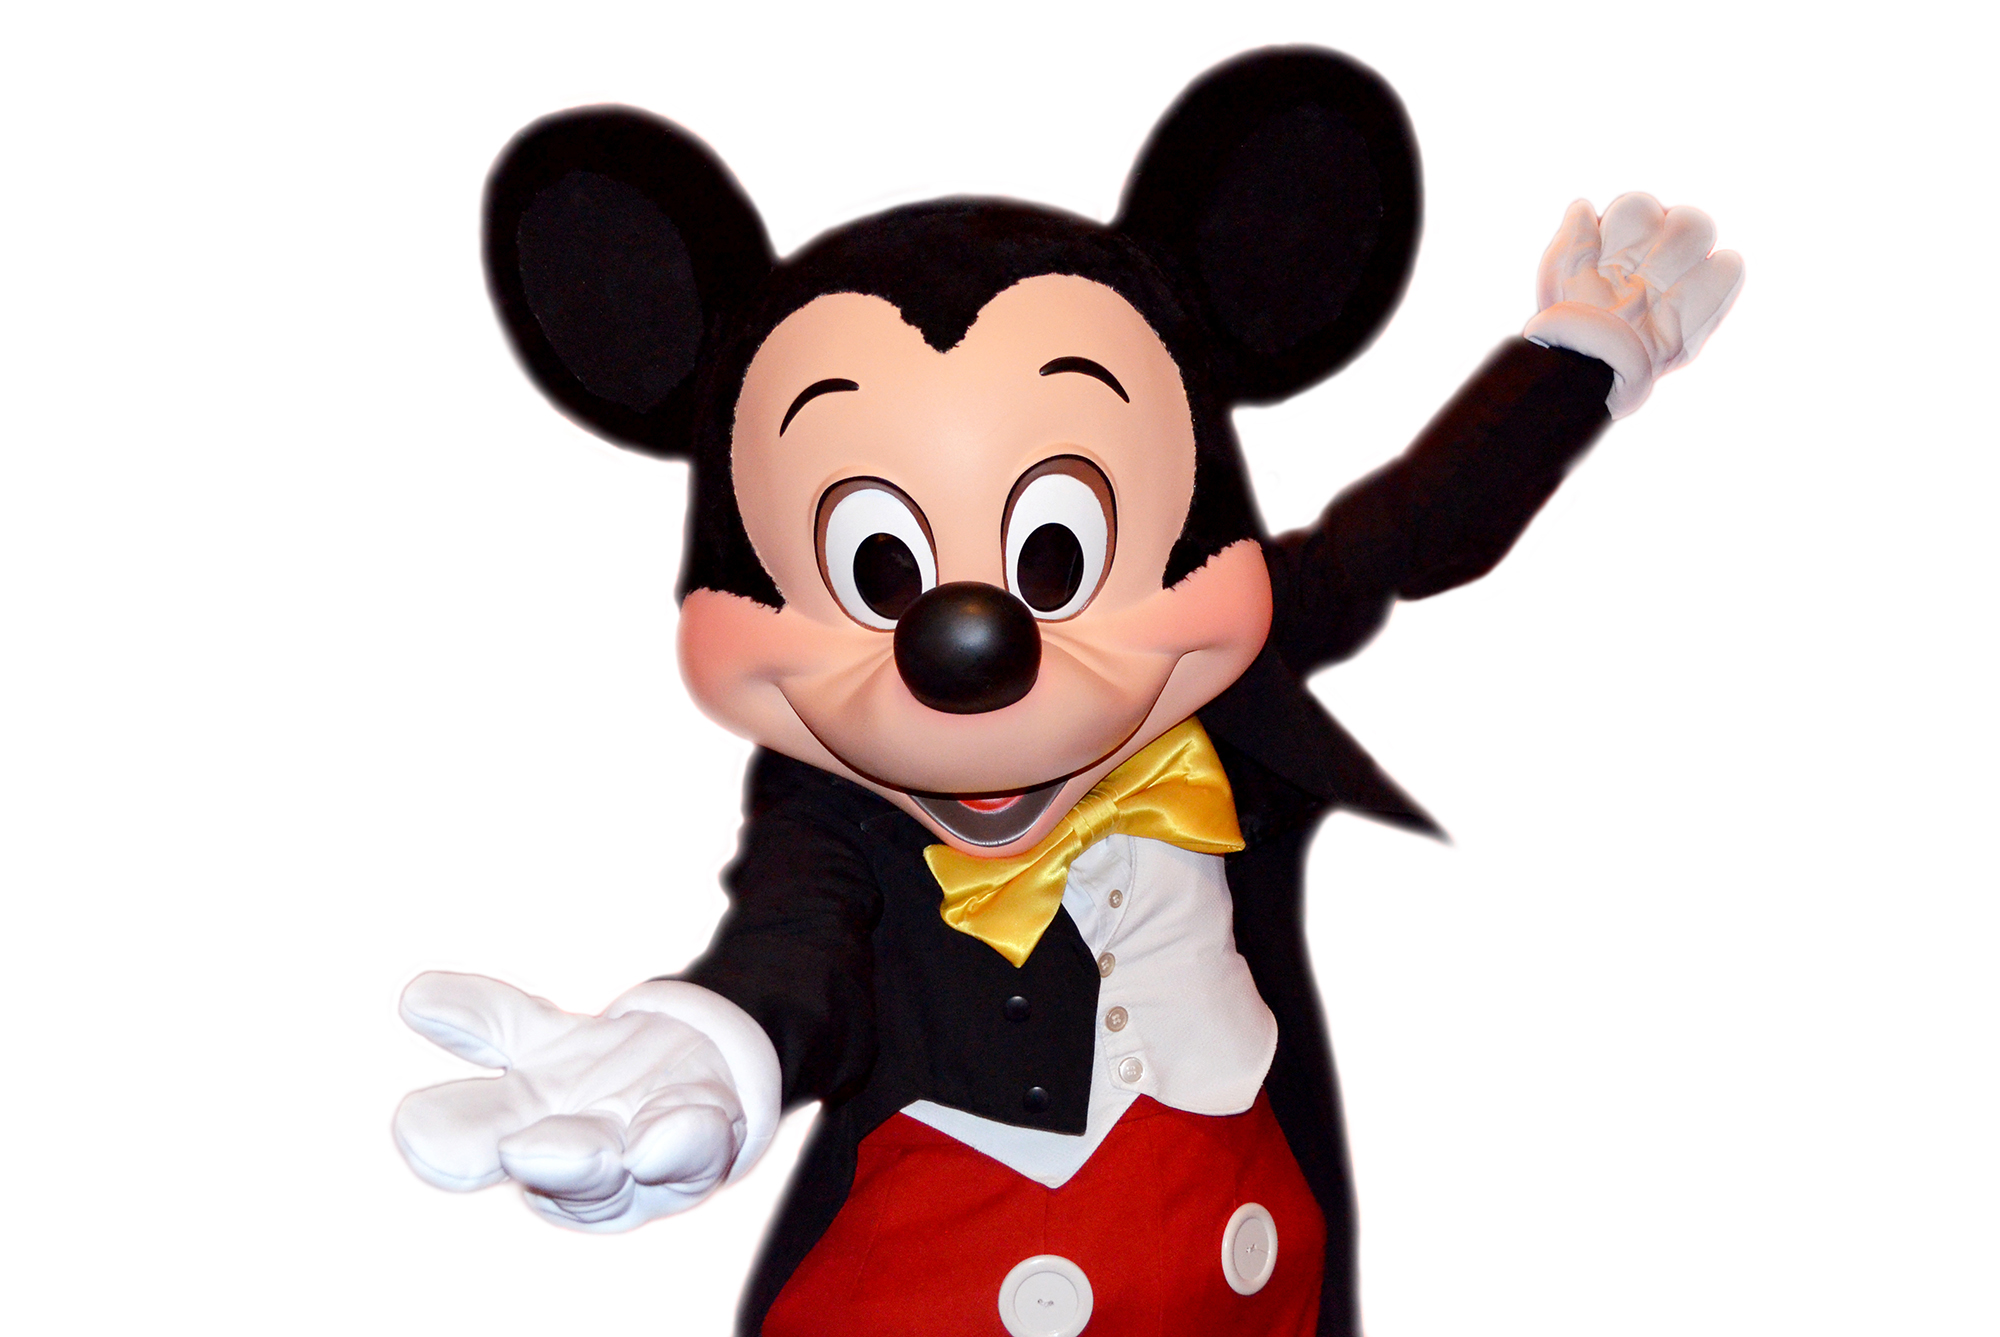 Mickey Mouse will soon belong to you and me—with some caveats